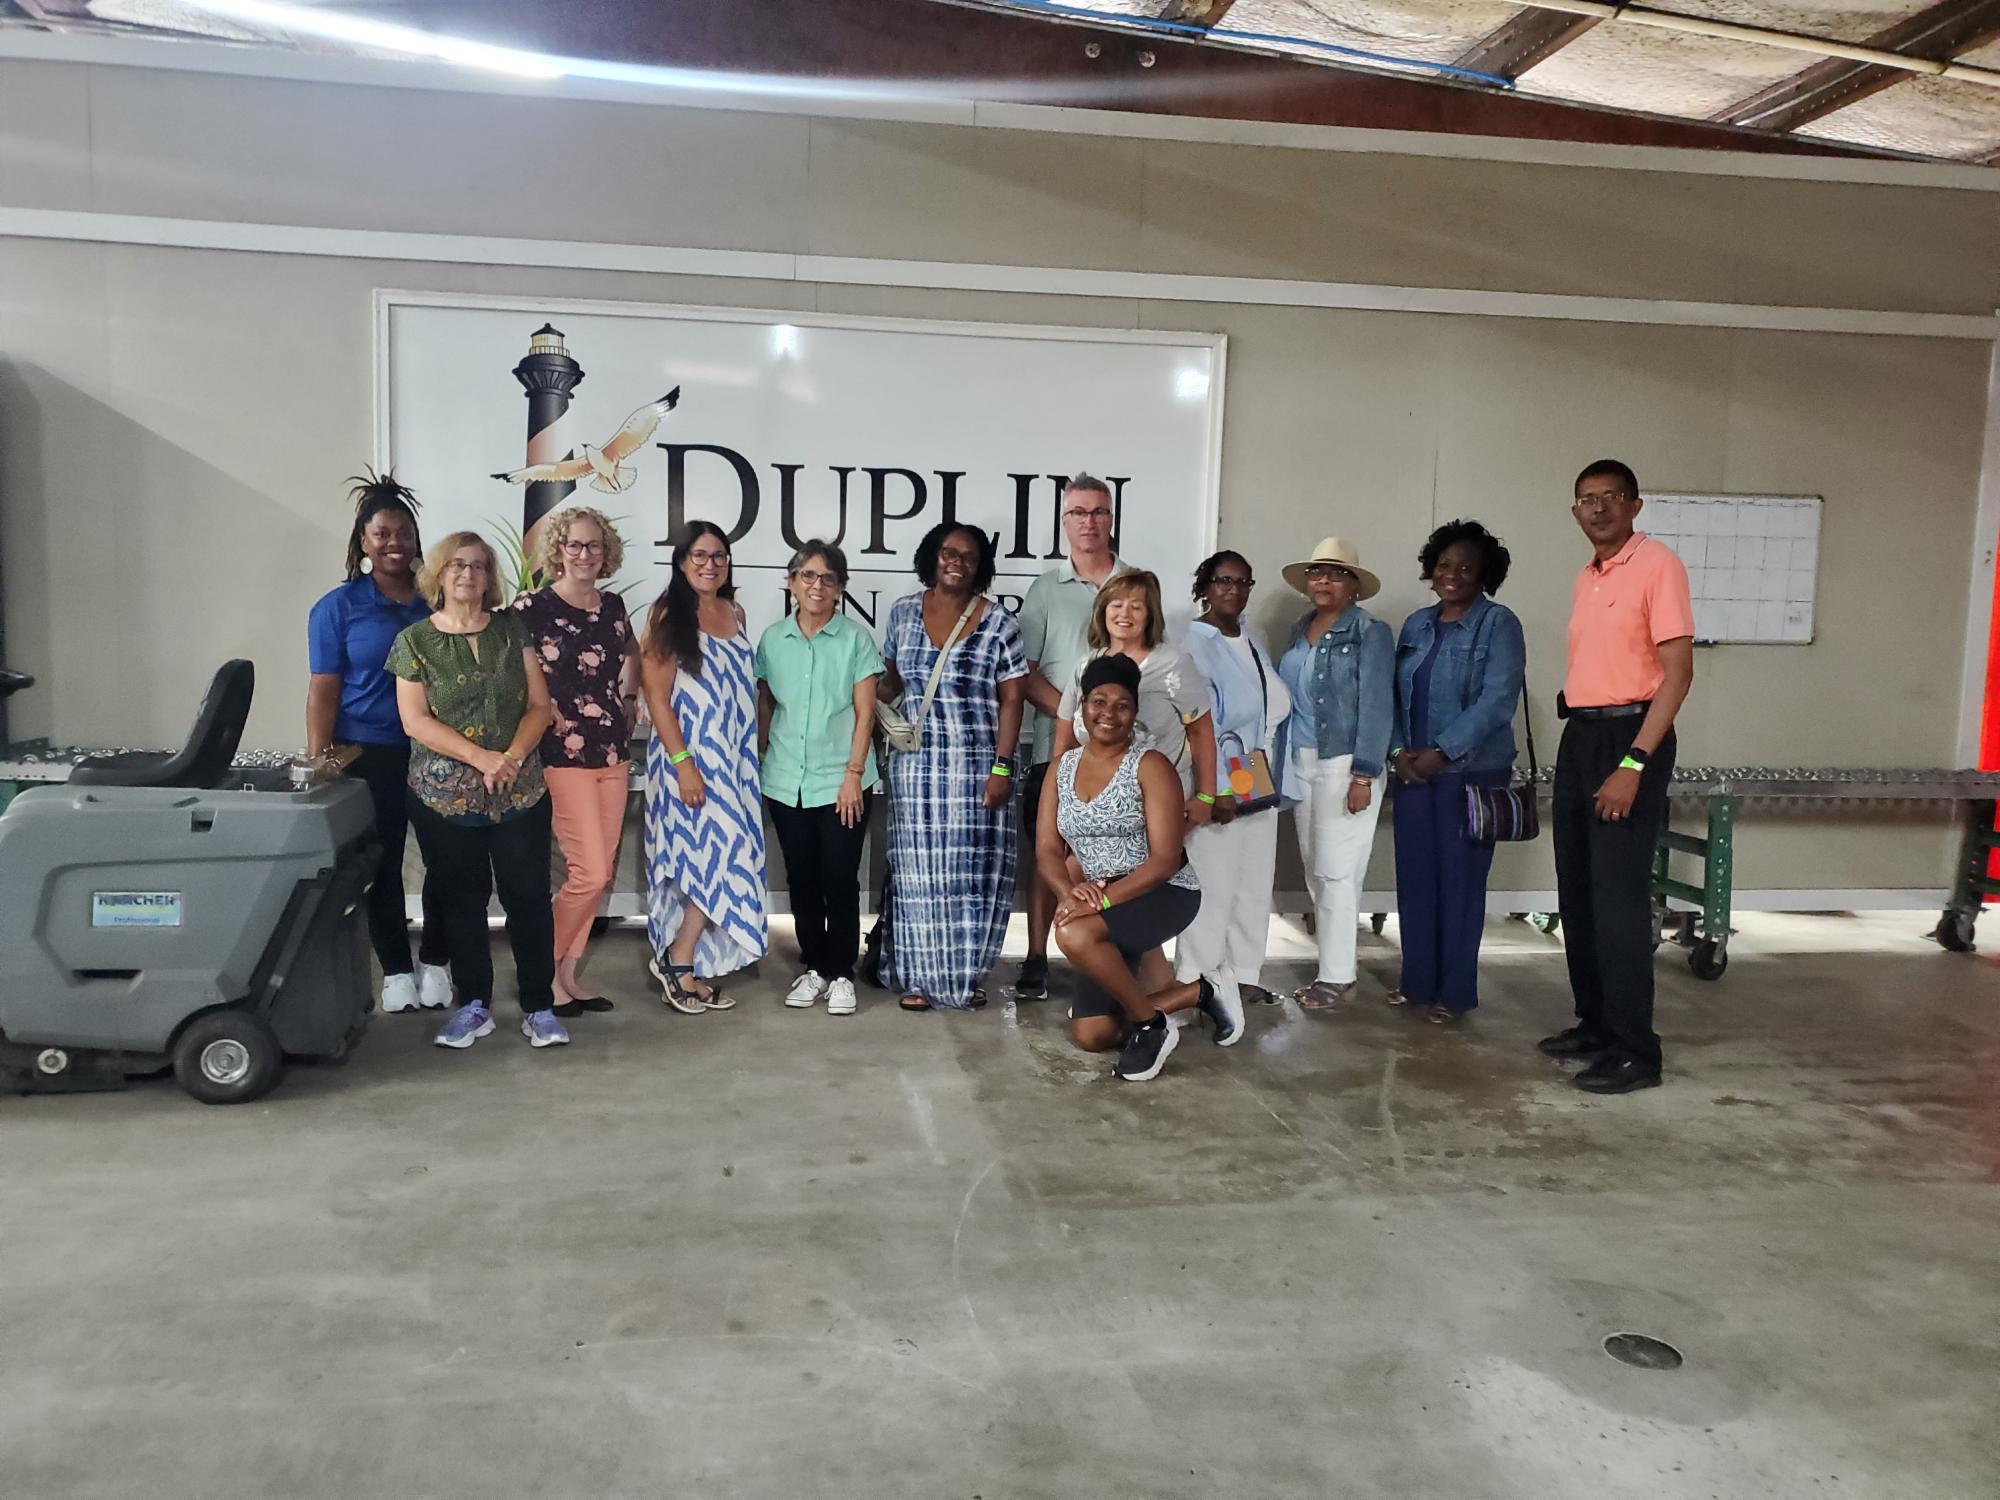 Group Picture at Duplin Winery